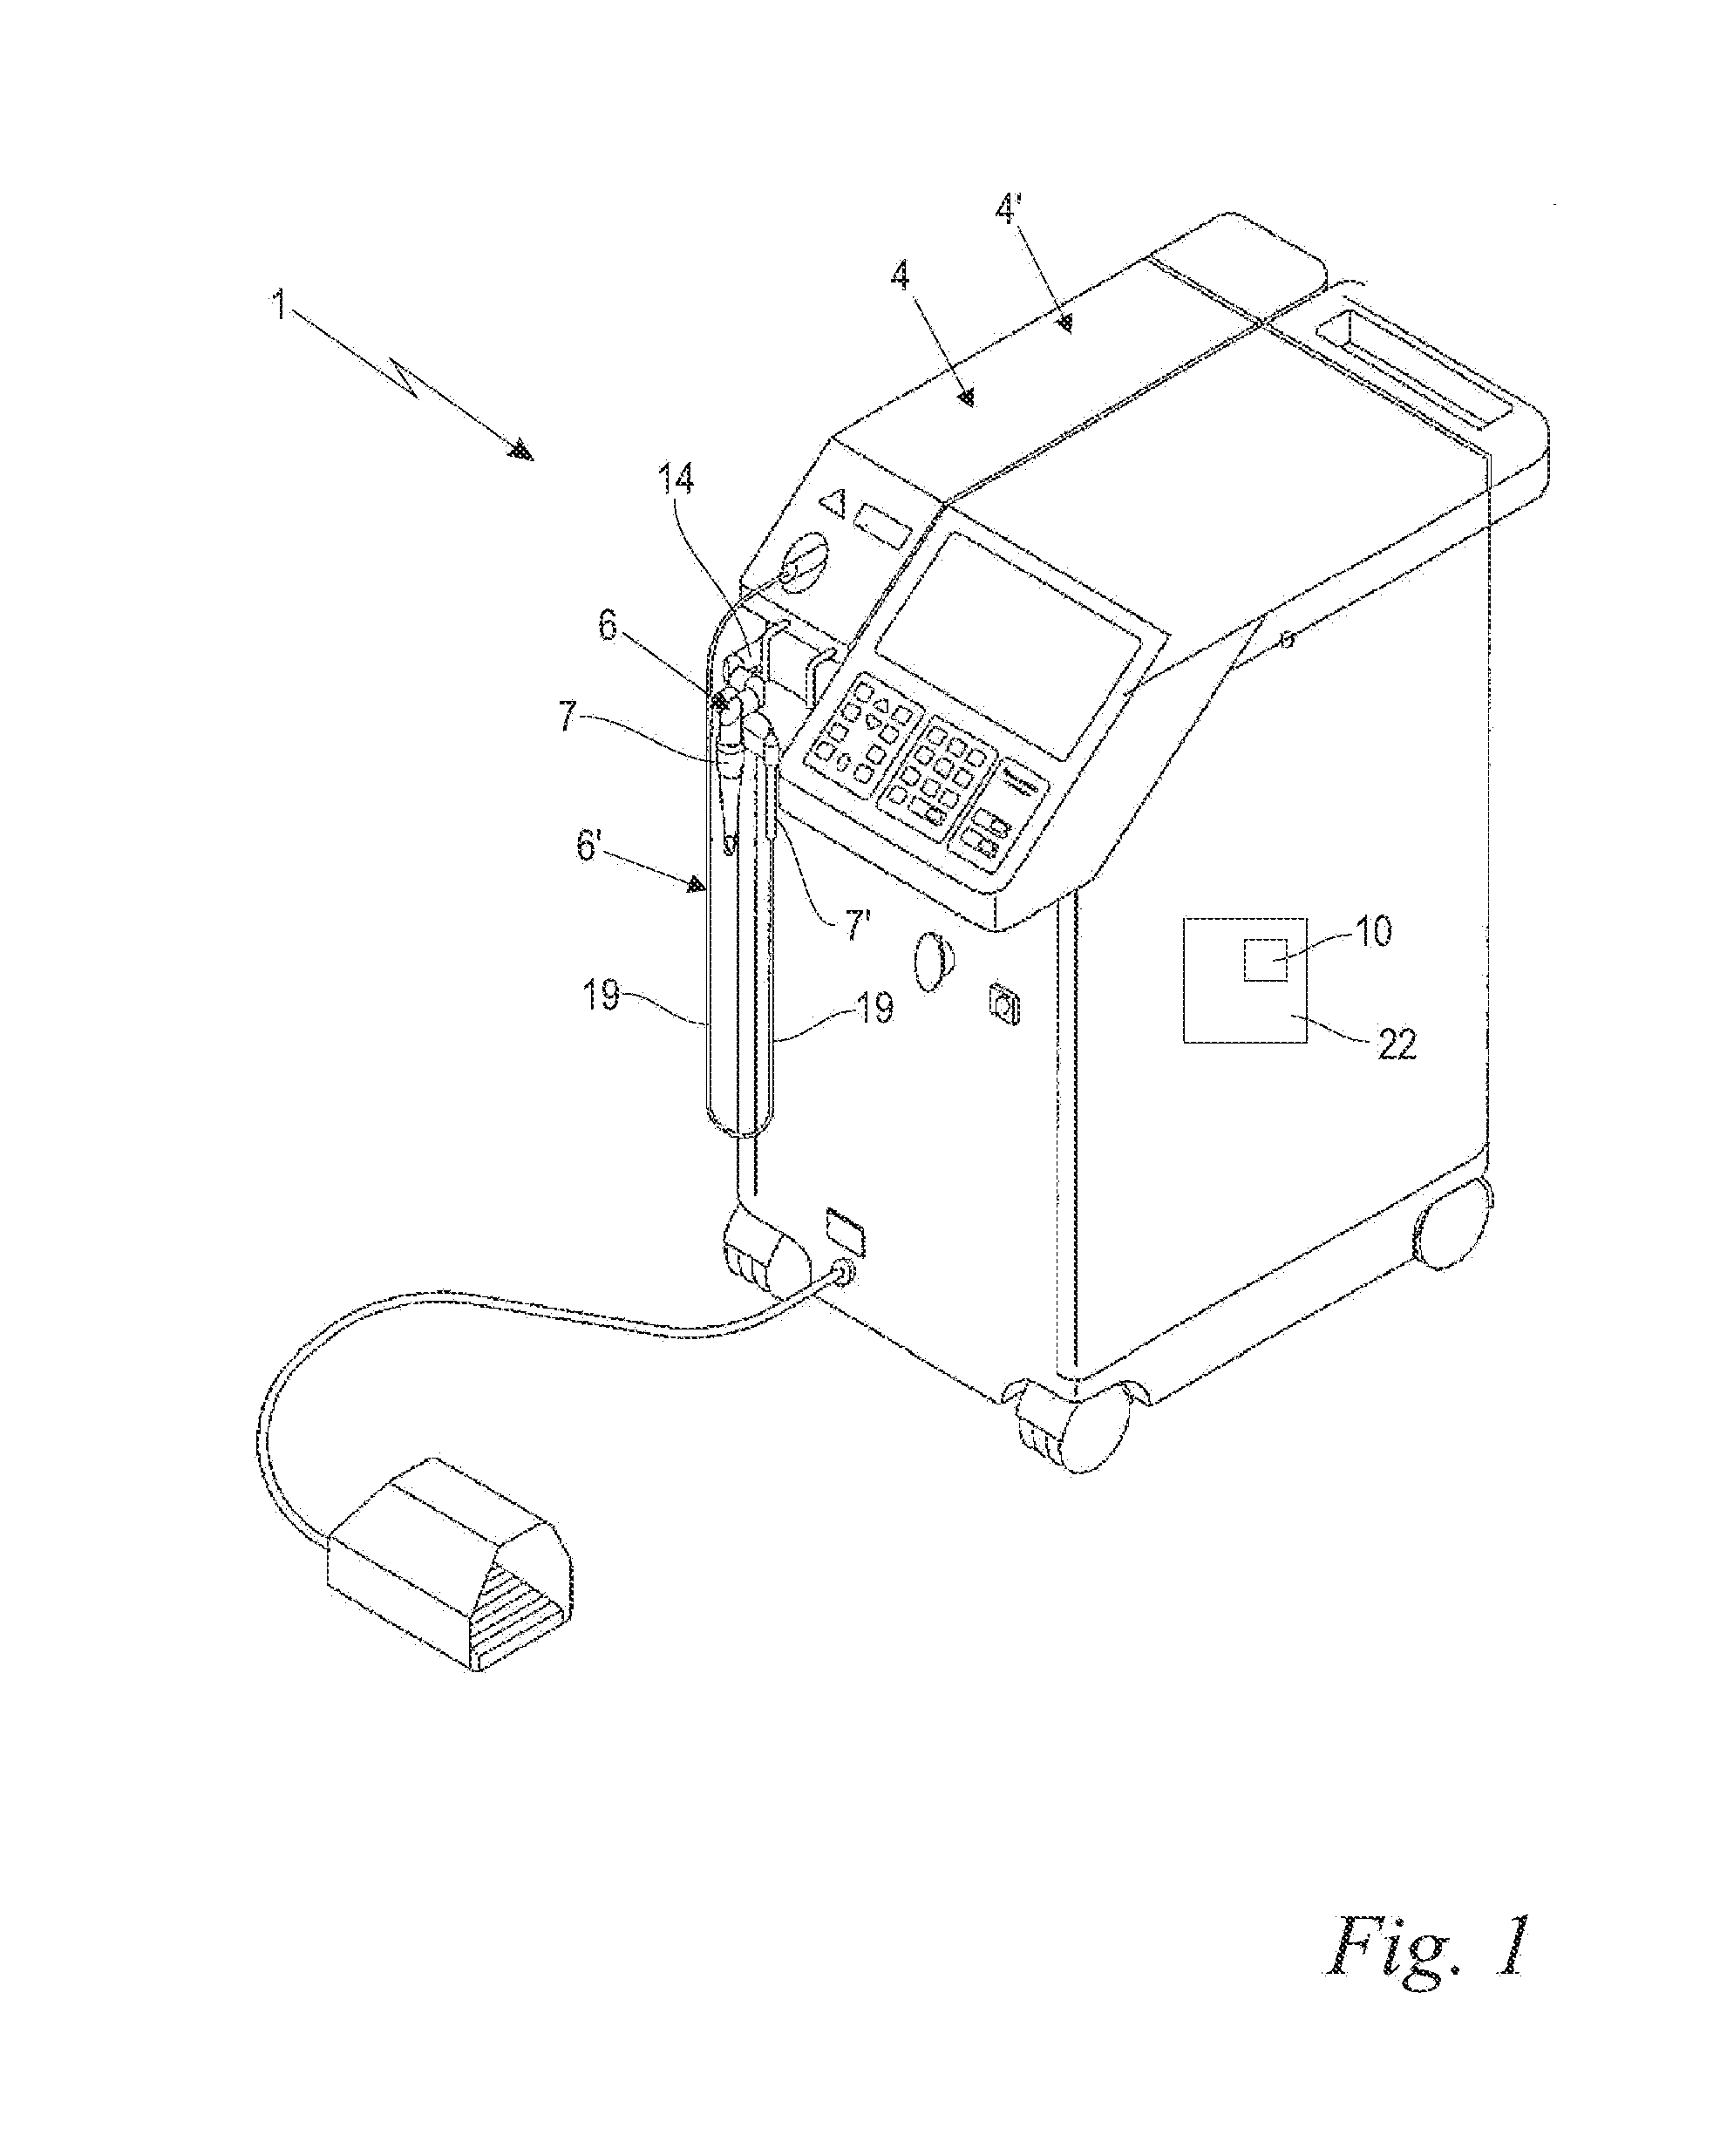 Laser system and method for operating the laser system